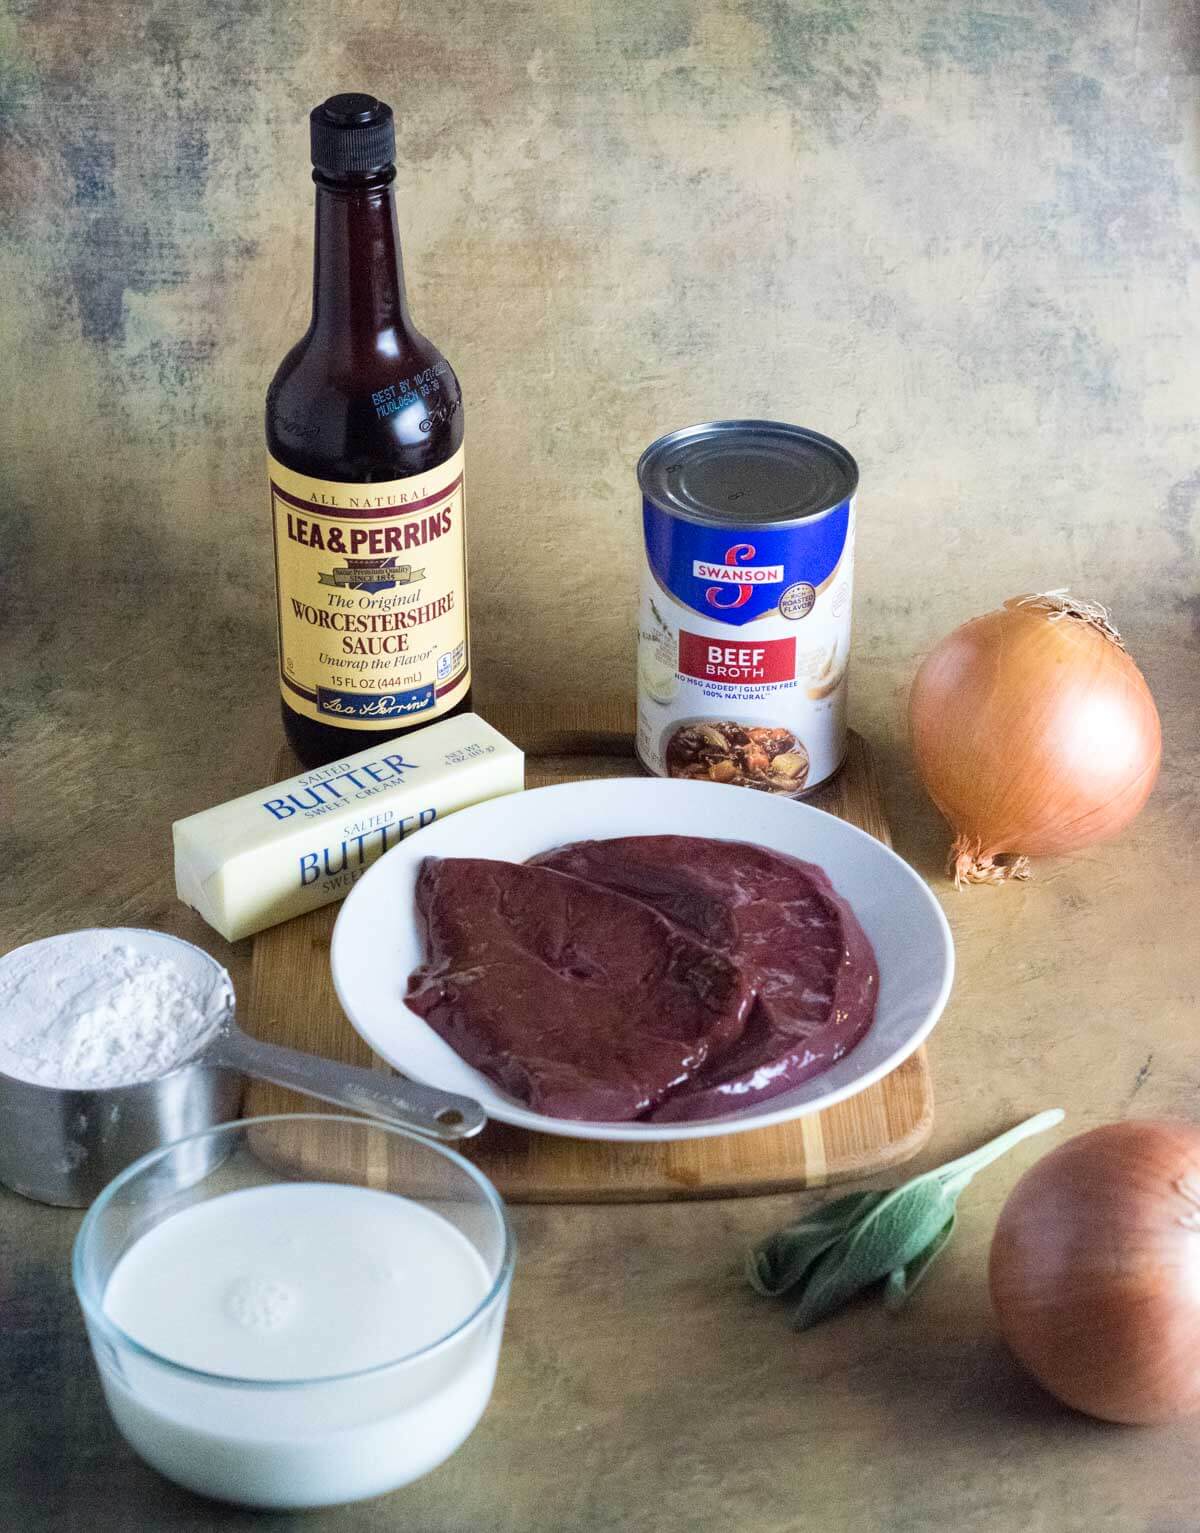 Showing ingredients for liver and onions with gravy.